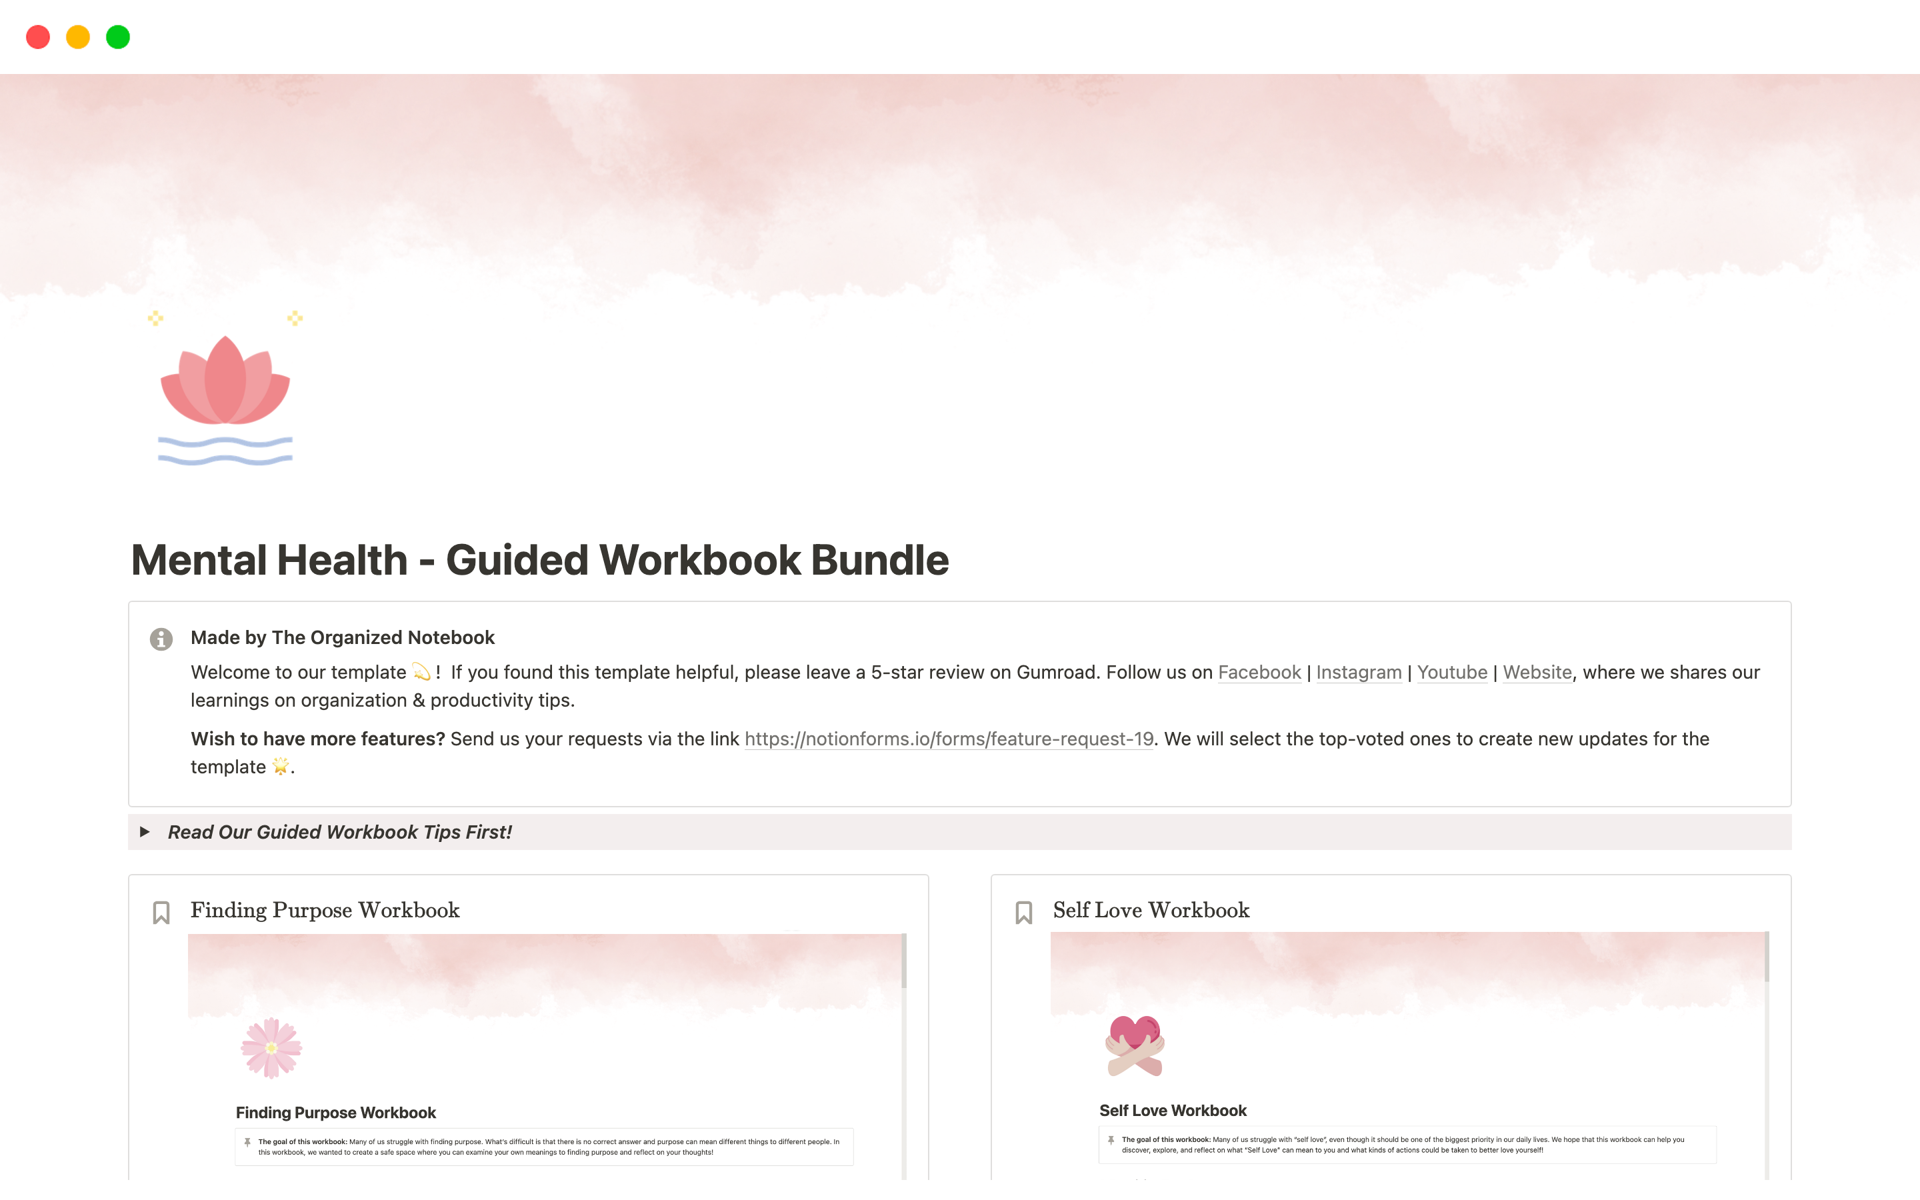 We’ve designed this Mental Health Guided Workbook to walk you through important aspects to consider when you think about your mental health; there are 4 workbooks in total: Finding Purpose, Self-Love, Burn-out, and Anxiety Relief. 